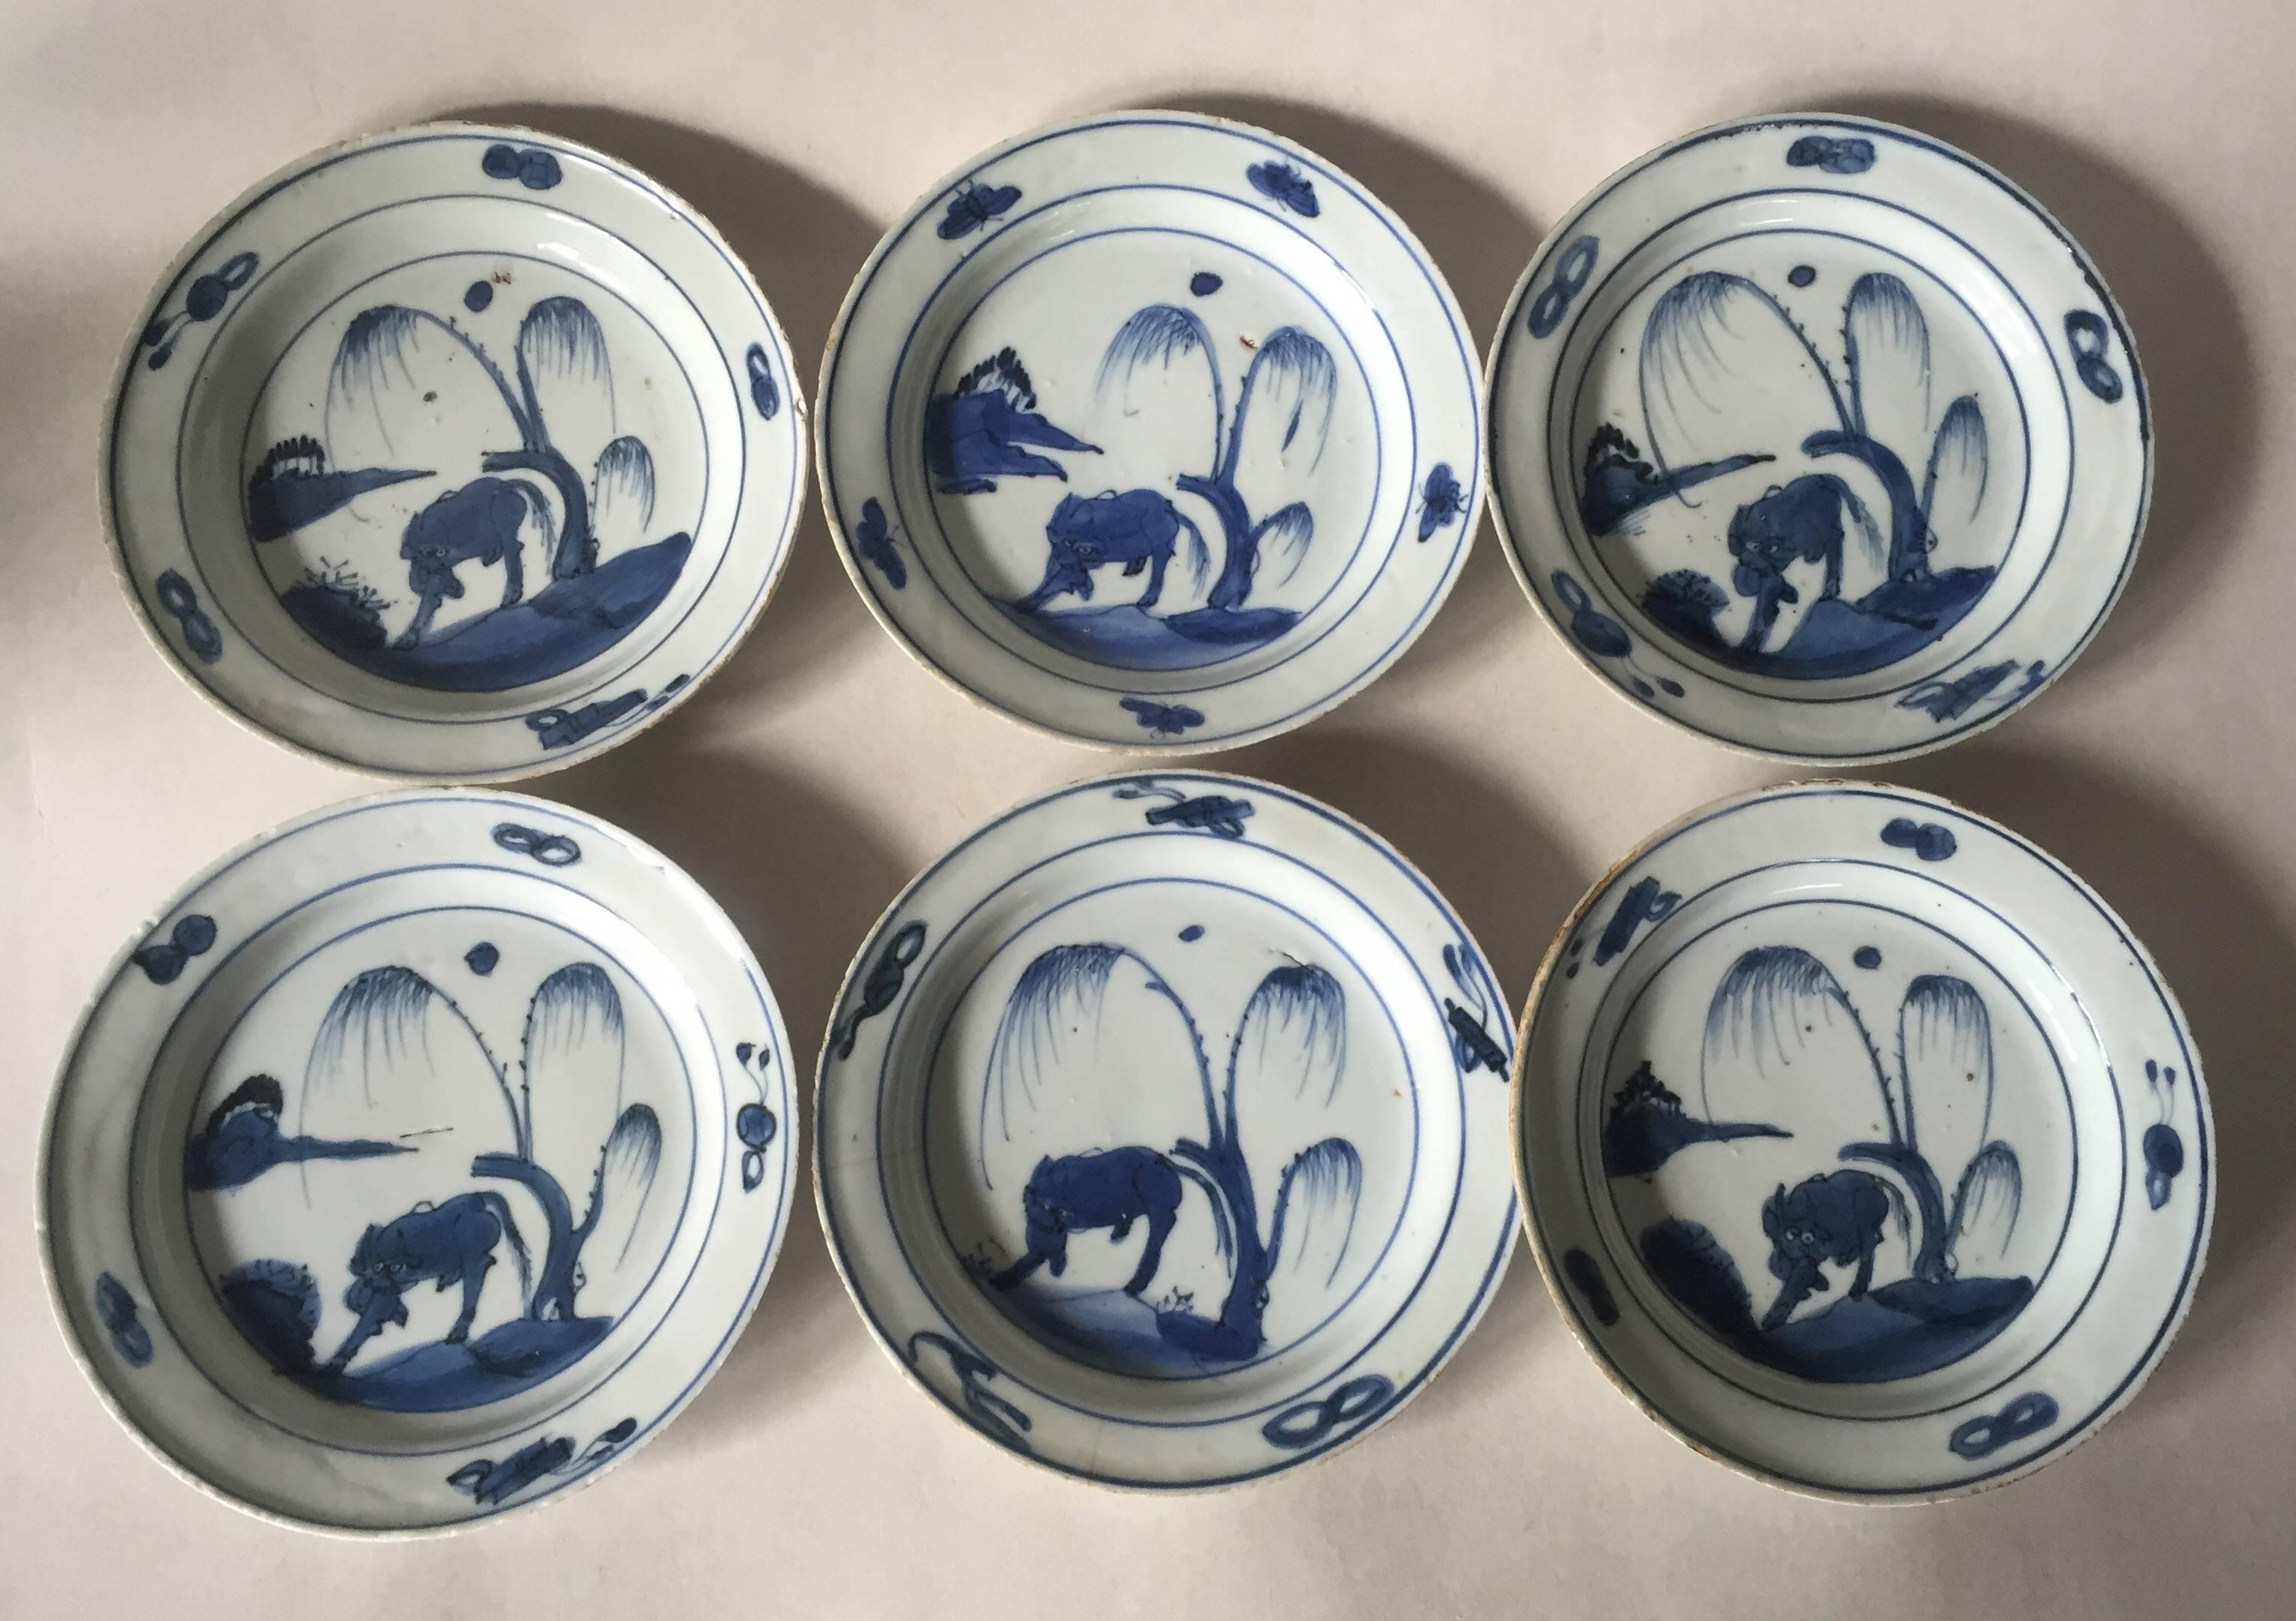 Very rare and unique six Ko Somestuke dishes made for the Japanese market in the late Wanli- Tianqí reign 1610-1627. Depicting an ox under a tree. Five of the dishes are in a very good condition for their age, they are free from cracks, chips and